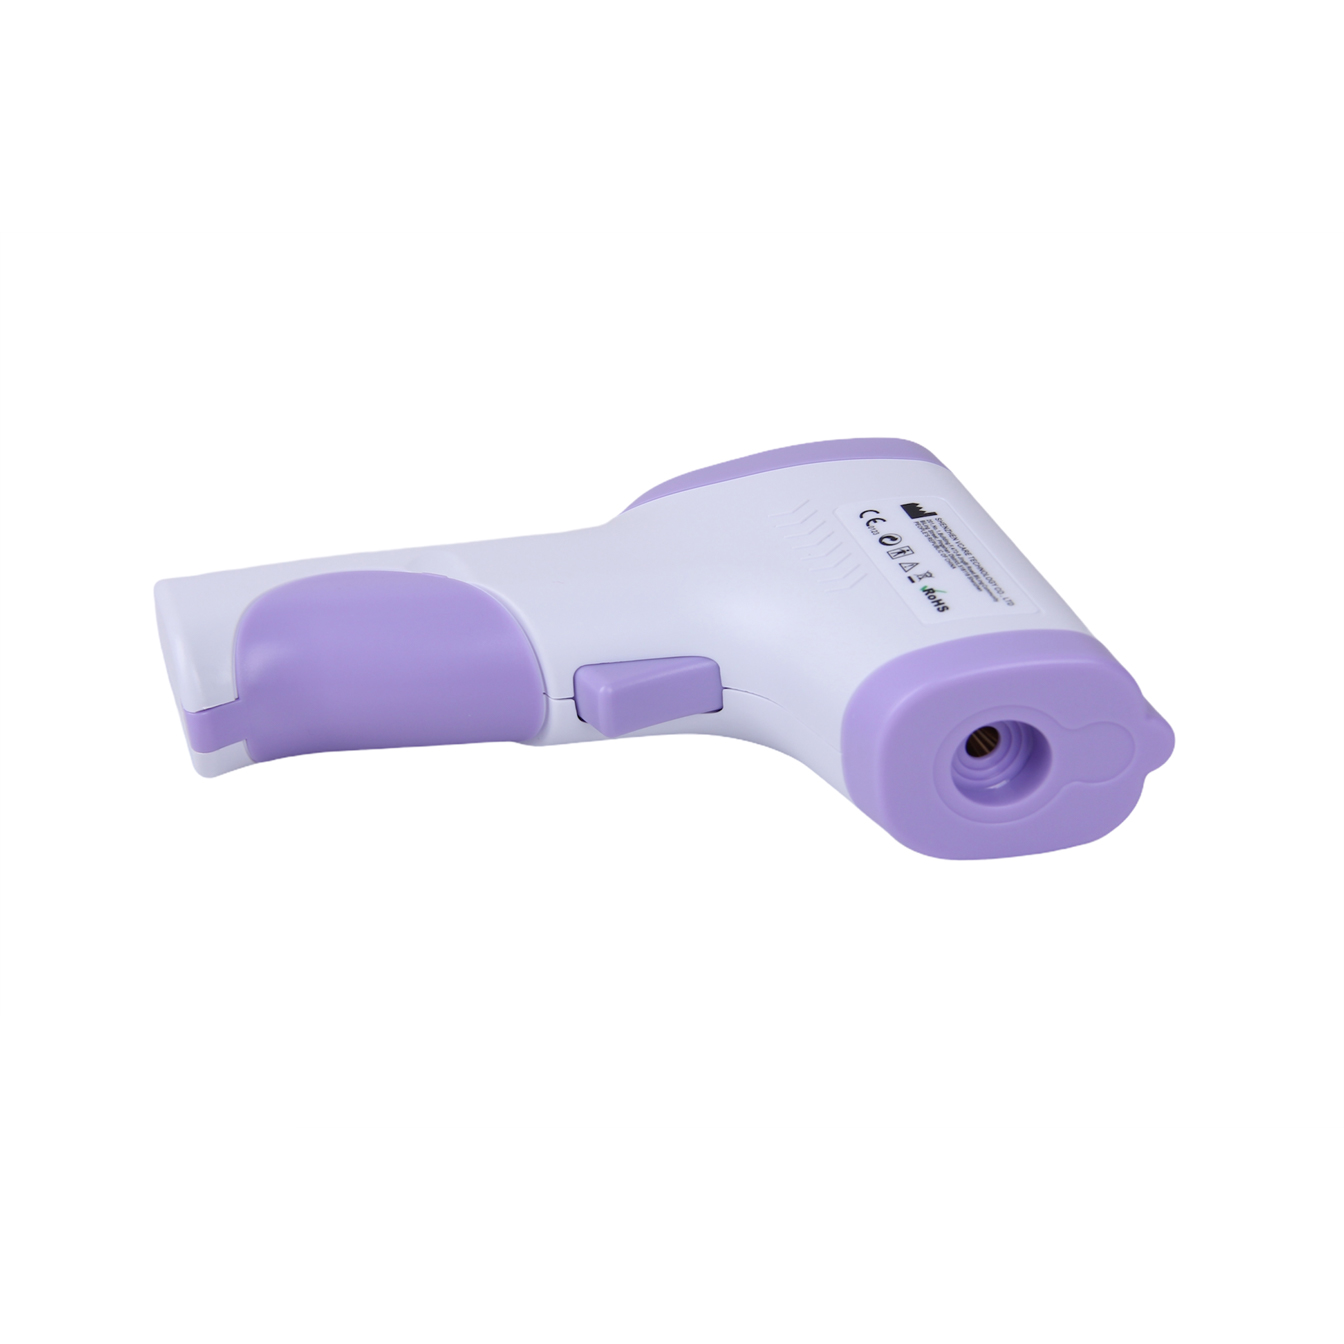 Contactless Infrared Thermometer